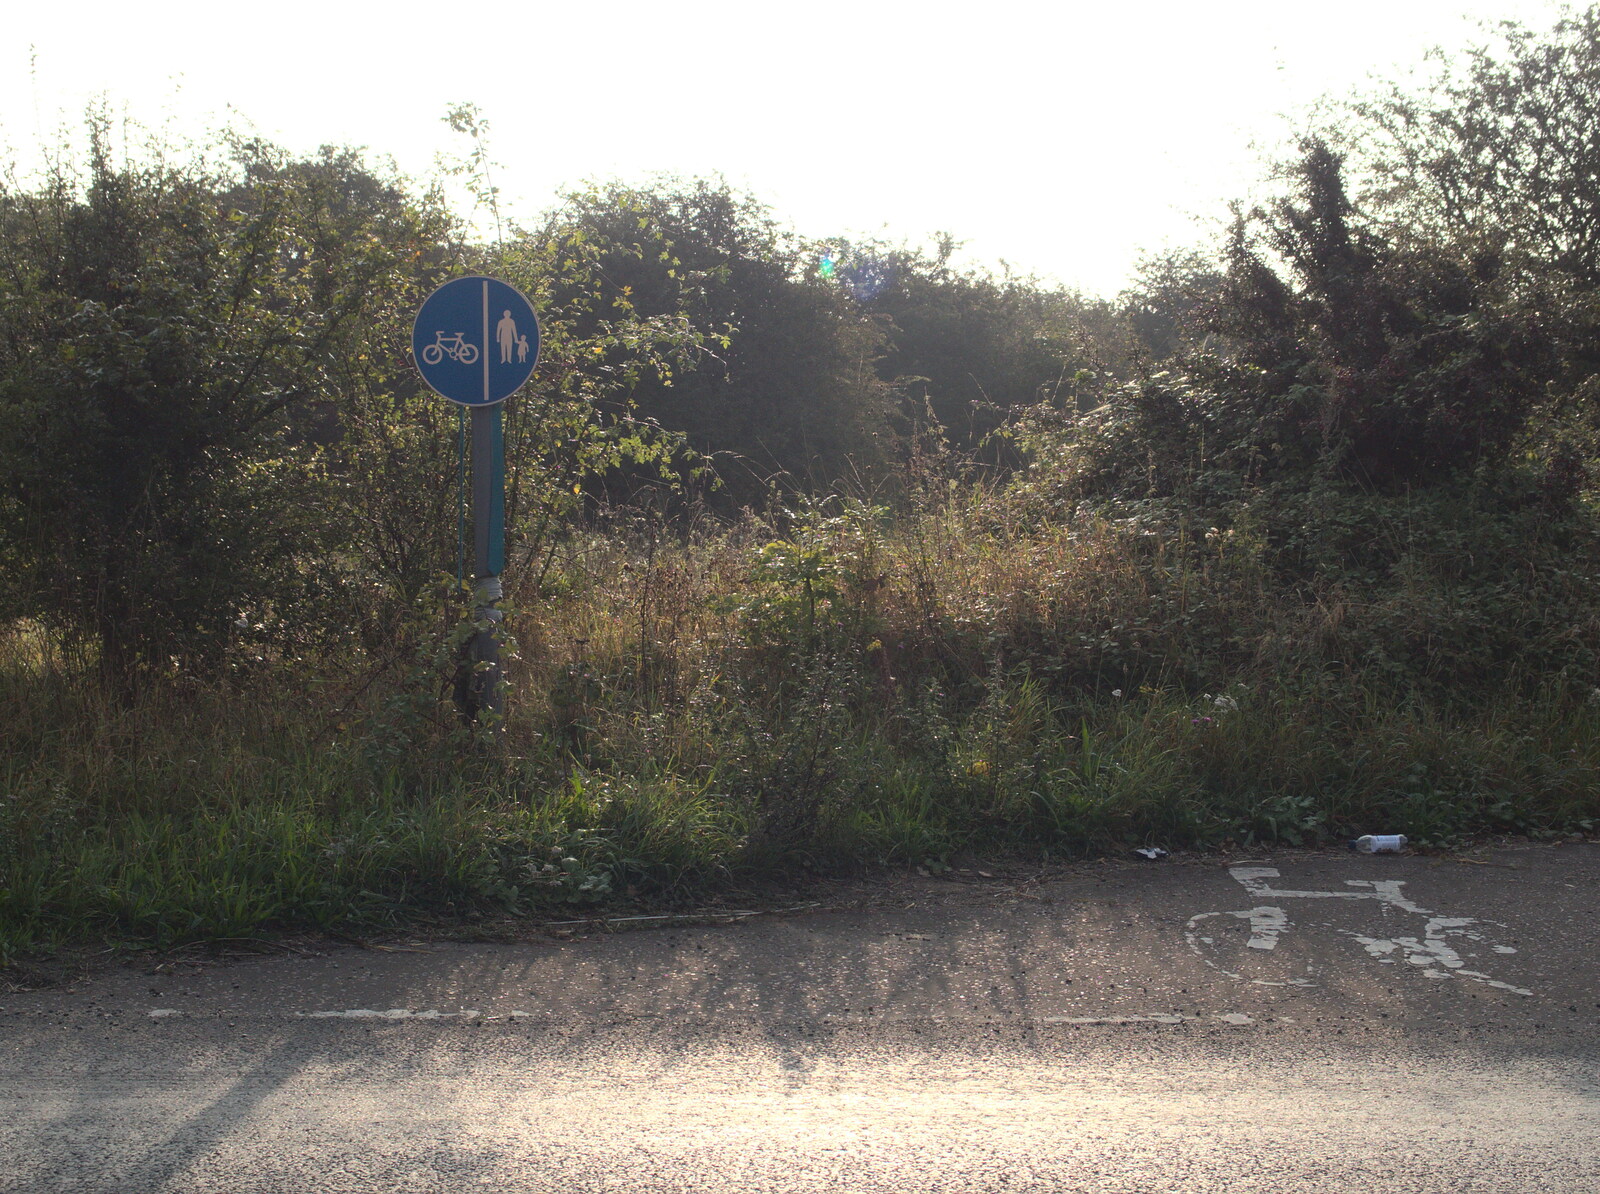 A pointless cycle track on the Stuston Road from New Railway and a Trip to Ikea, Ipswich and Thurrock - 19th September 2014